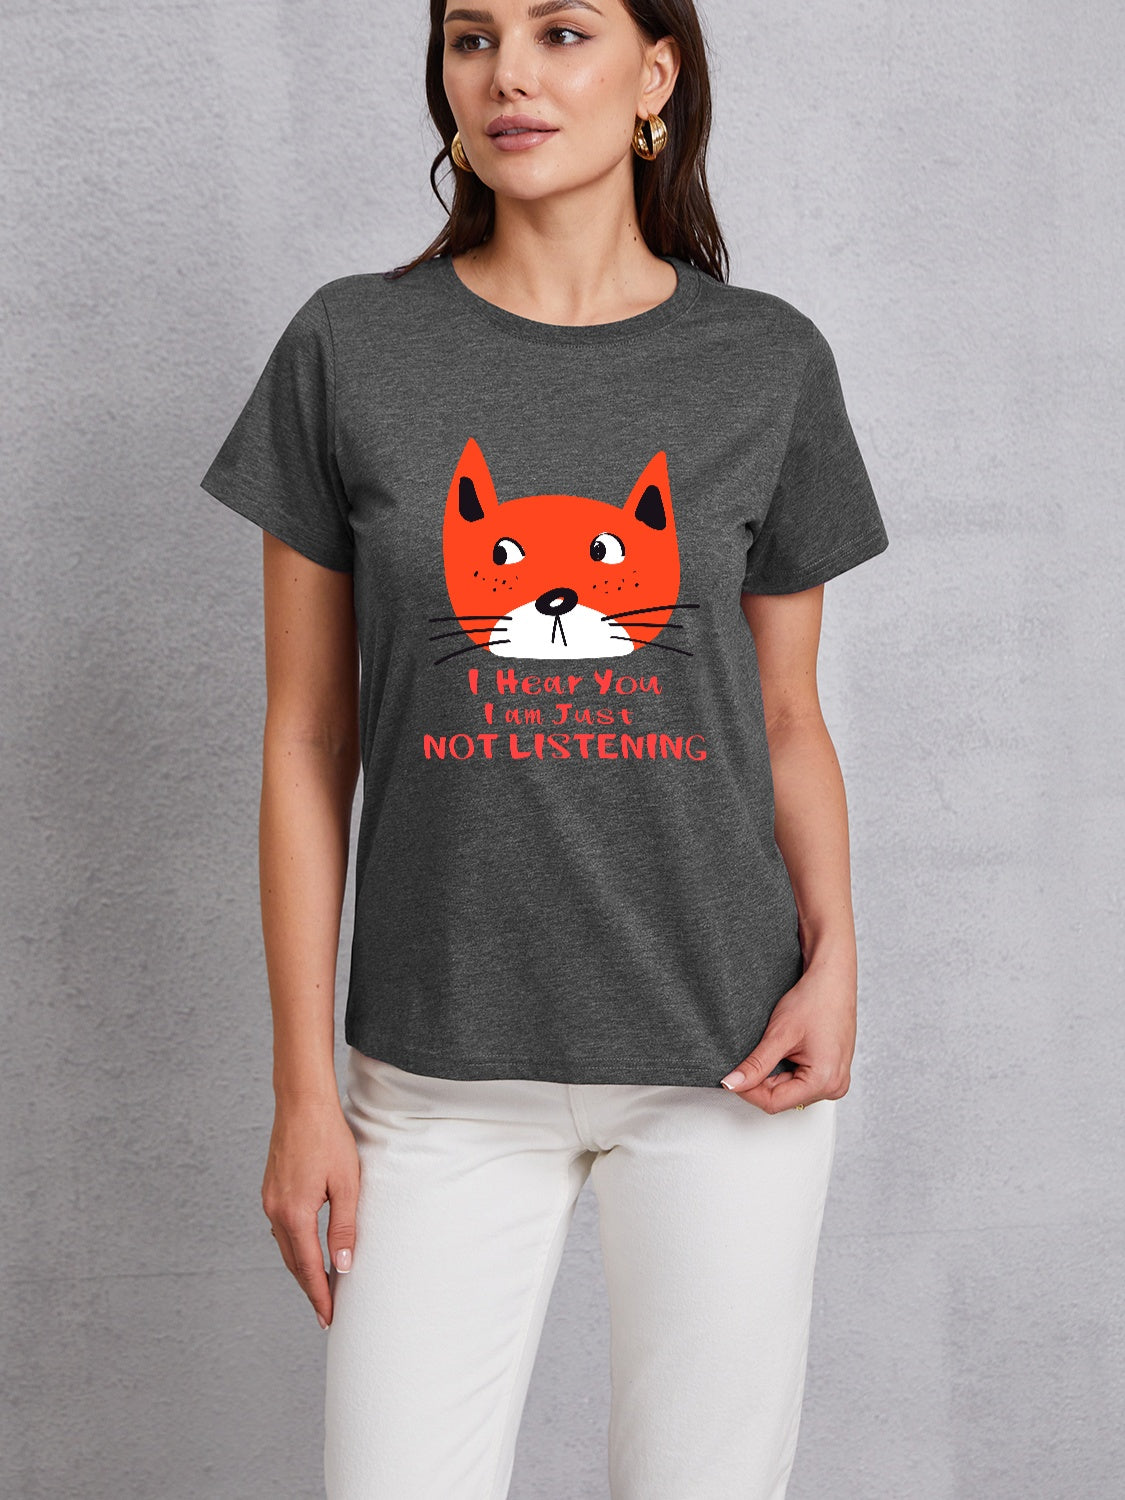 I HEAR YOU I AM JUST NOT LISTENING Round Neck T-Shirt